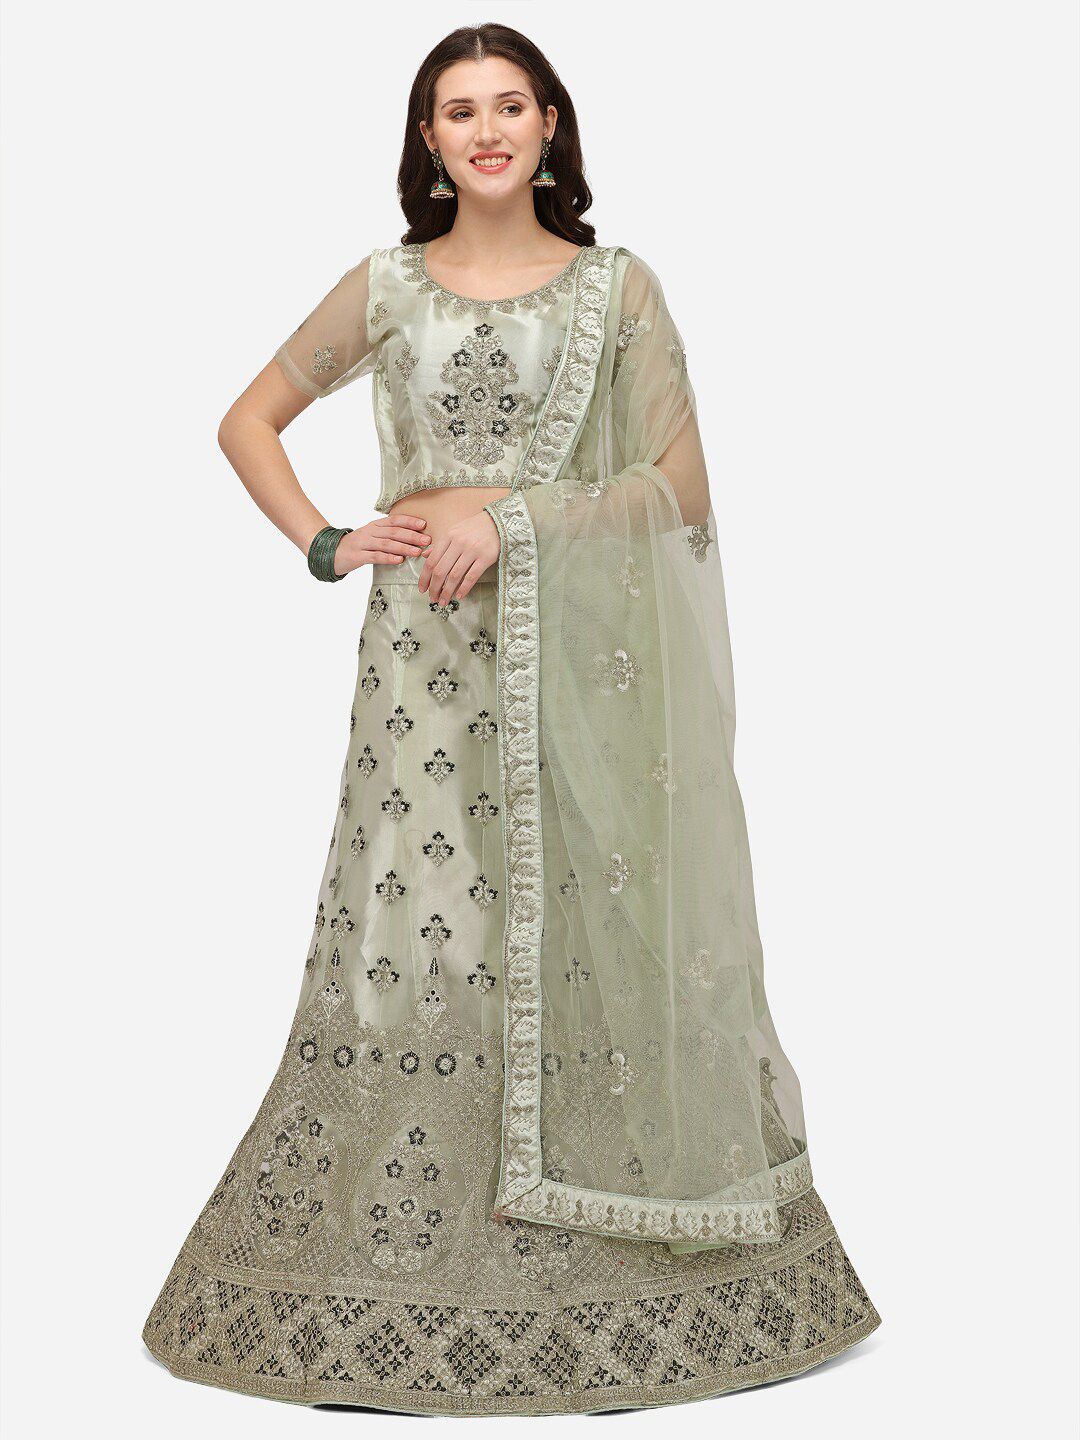 VRSALES Green Embroidered Semi-Stitched Lehenga & Unstitched Blouse With Dupatta Price in India